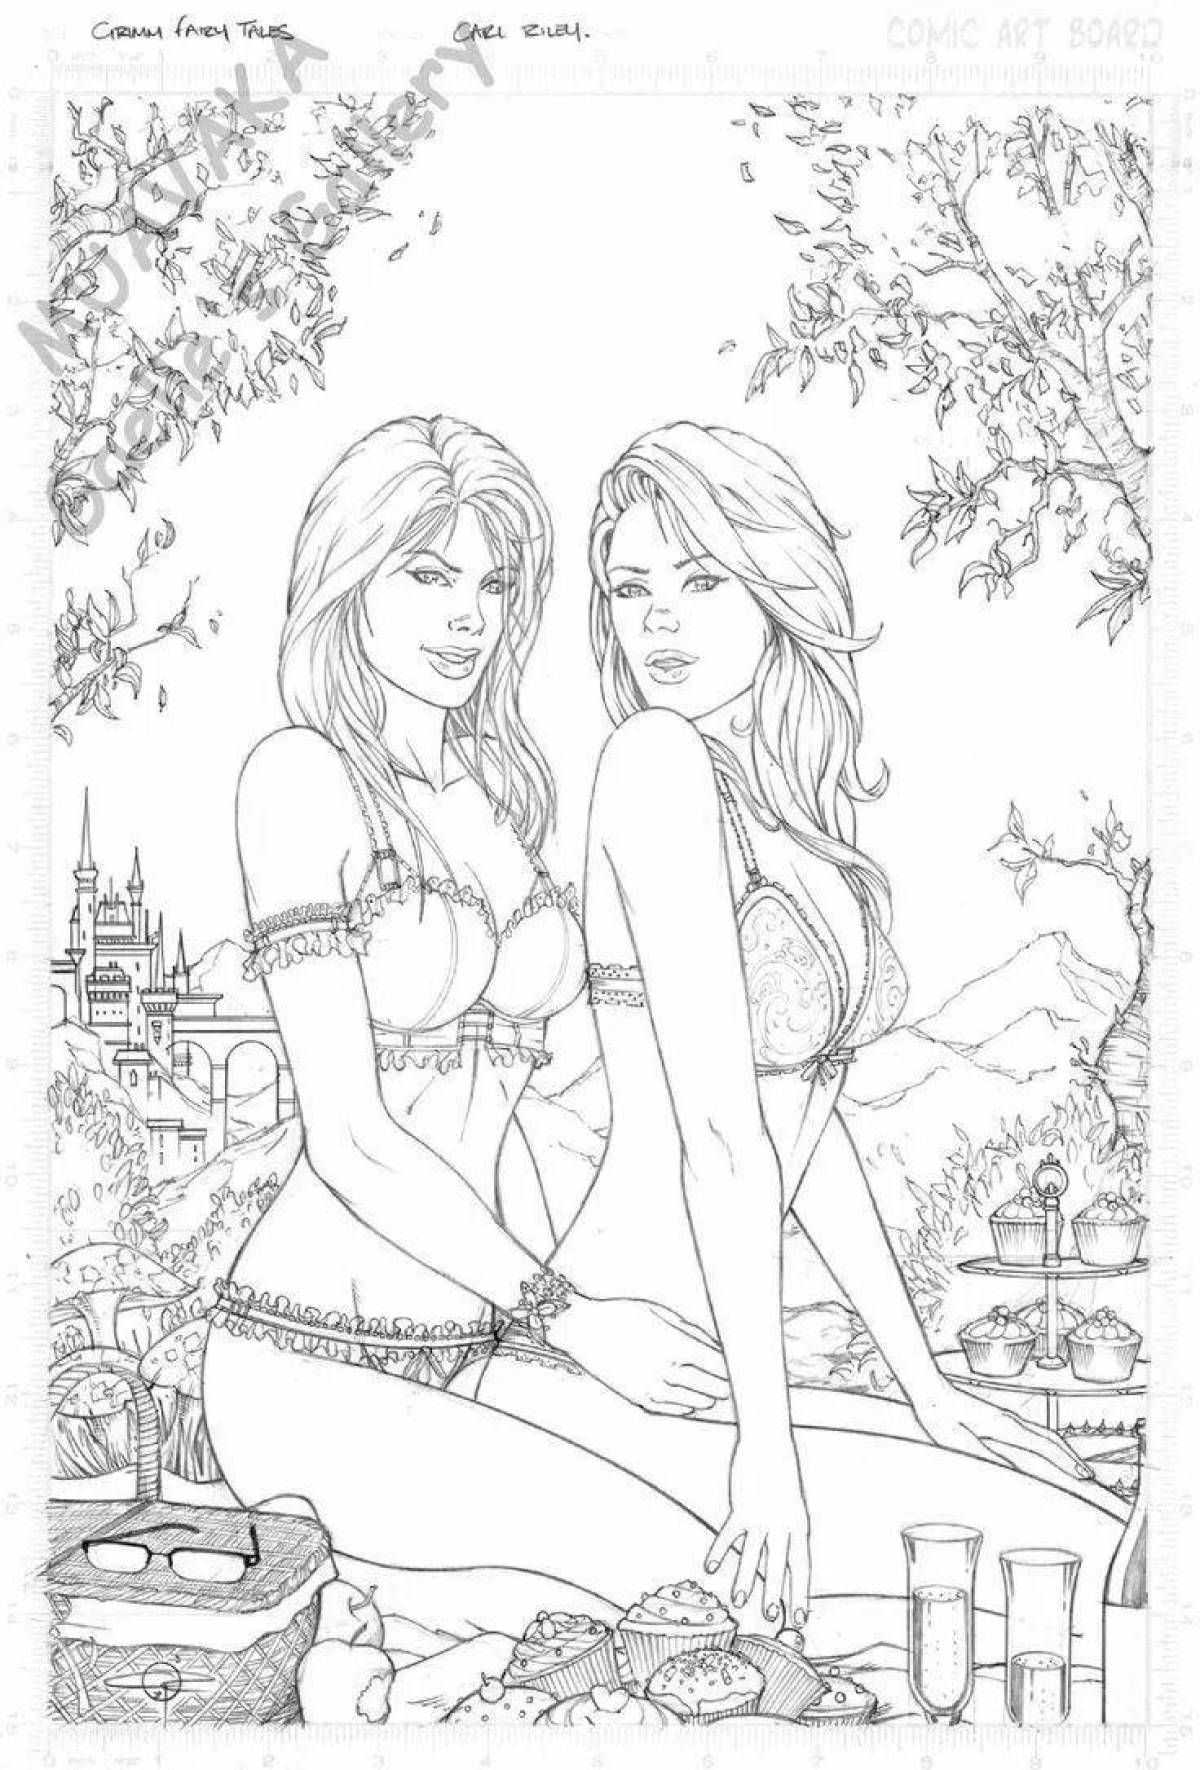 Elegant coloring book for all adults 18